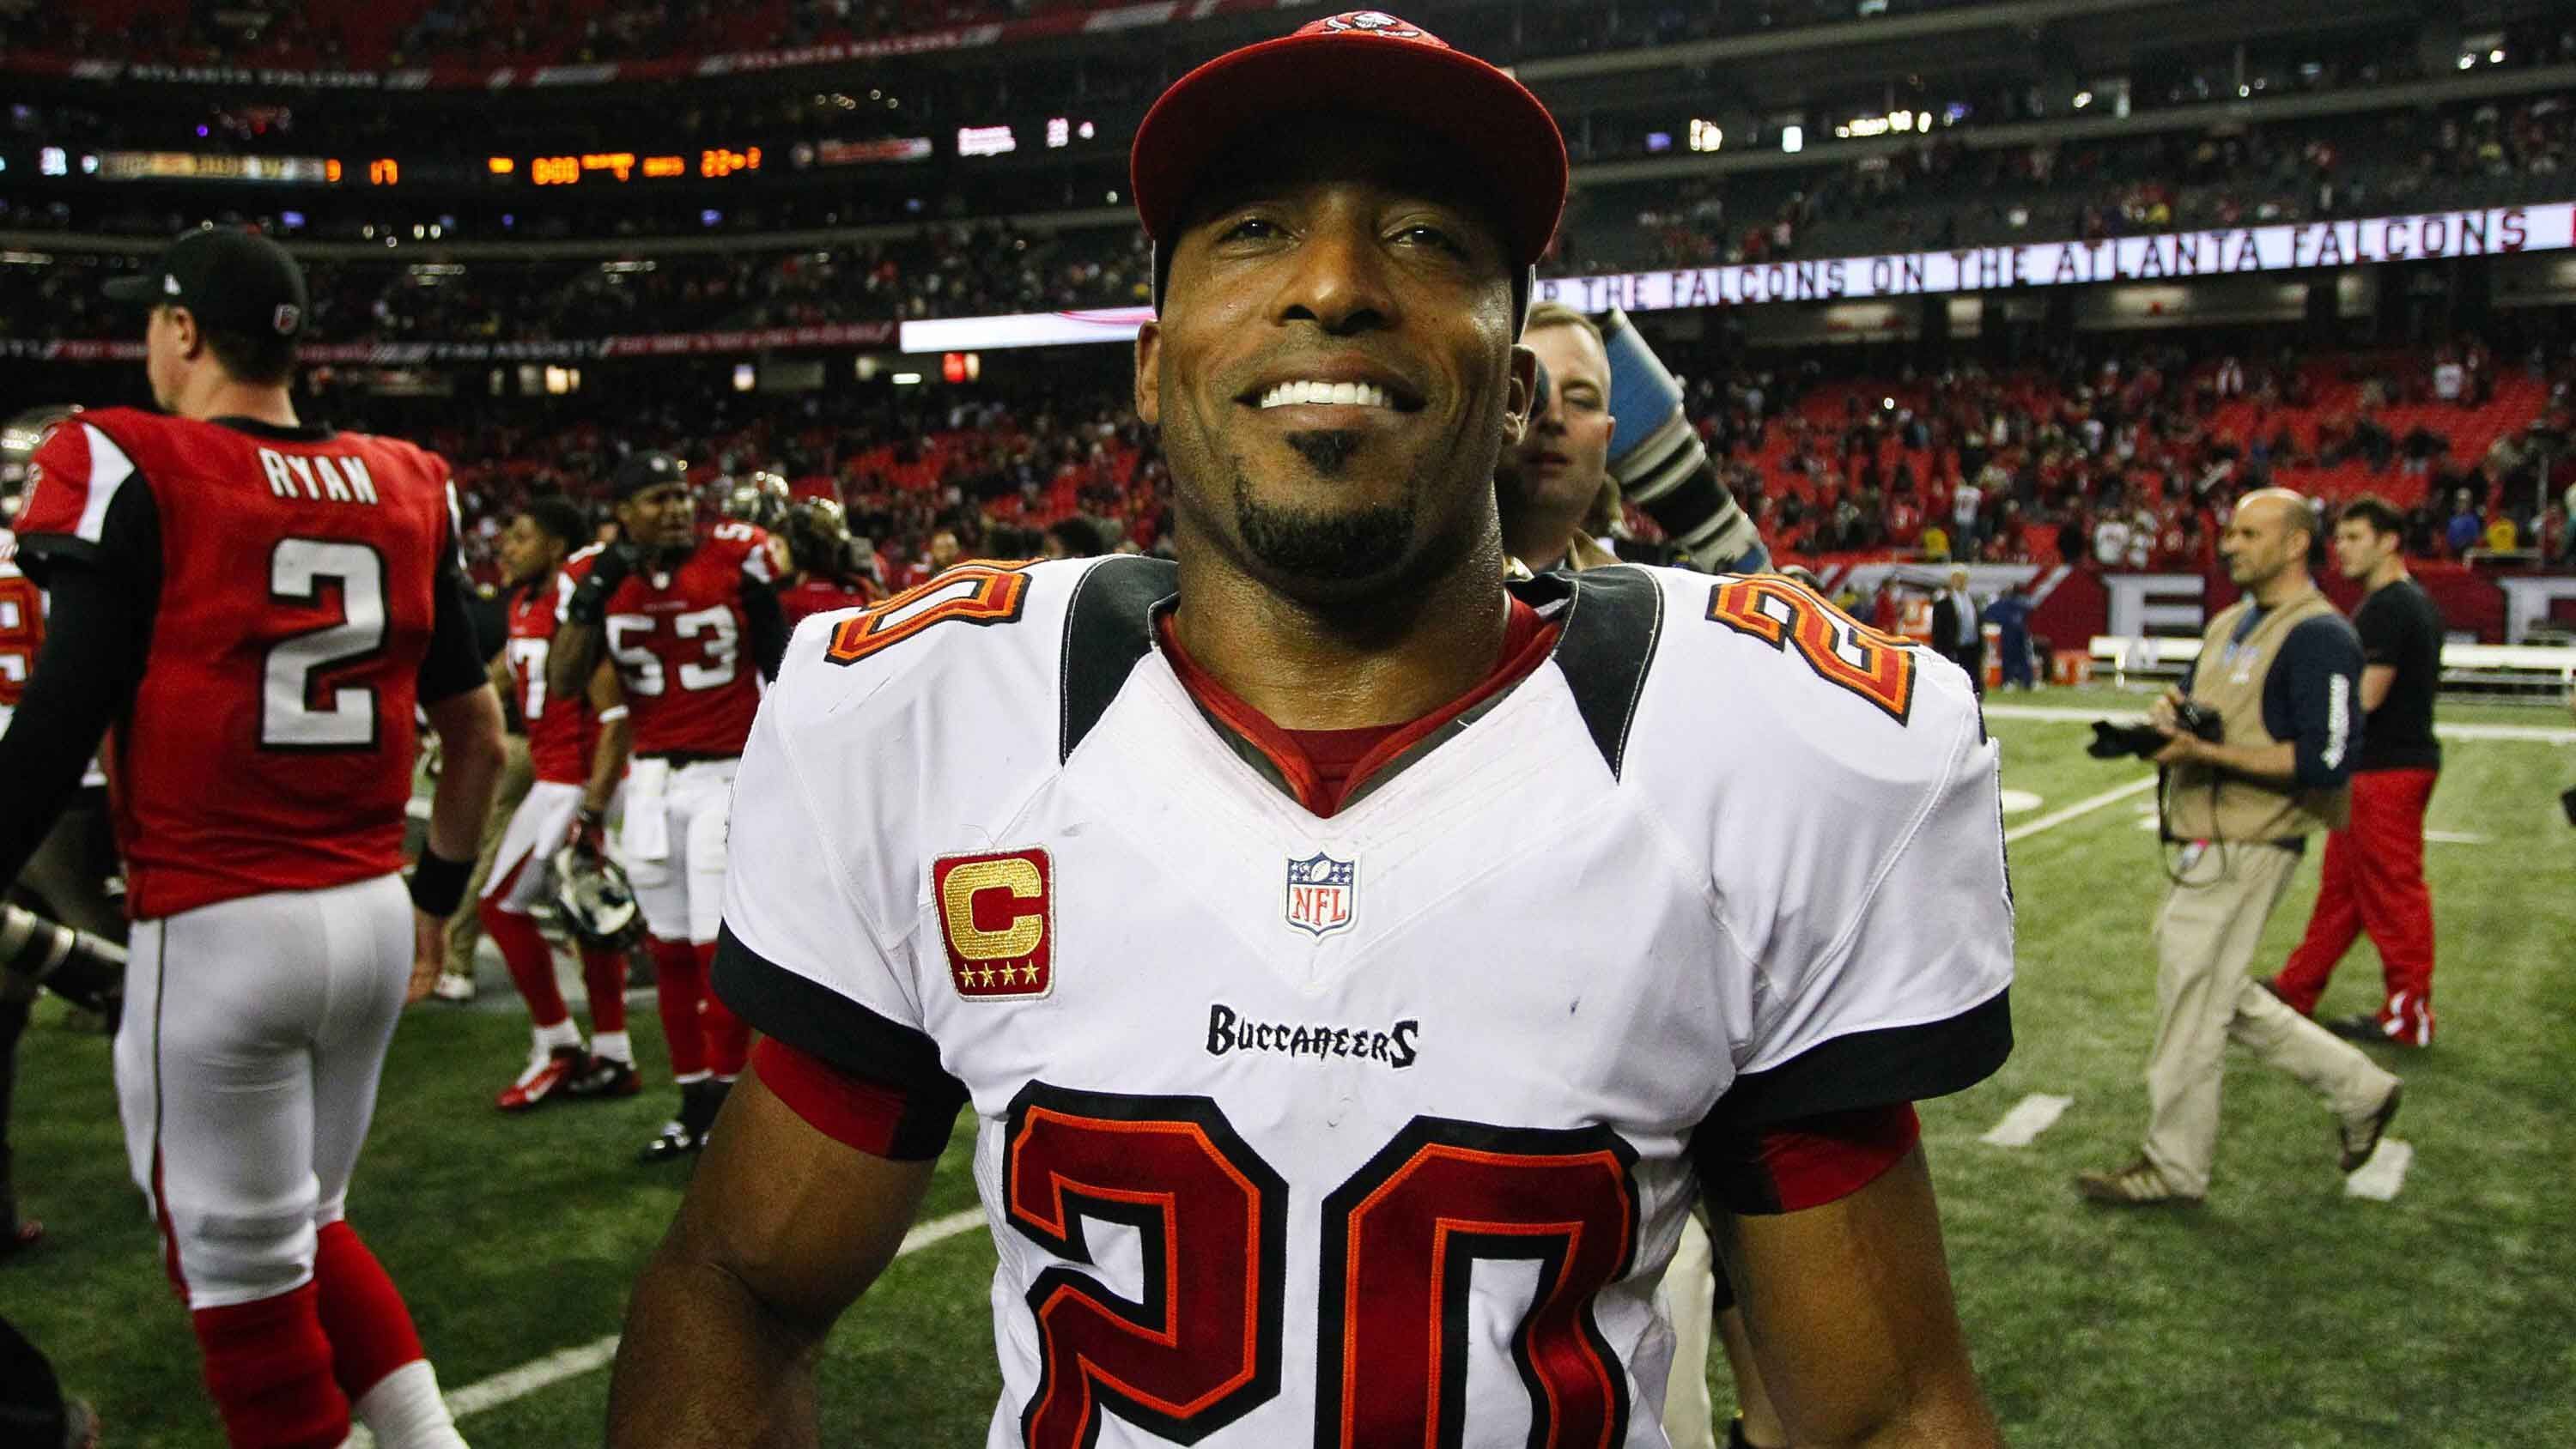 
                <strong>Tampa Bay Buccaneers</strong><br>
                &#x2022; Franchise-Rekord (all-time): Ronde Barber, 1997-2012: 47<br>&#x2022; Franchise-Rekord (eine Saison): Ronde Barber, 2001: 10<br>
              